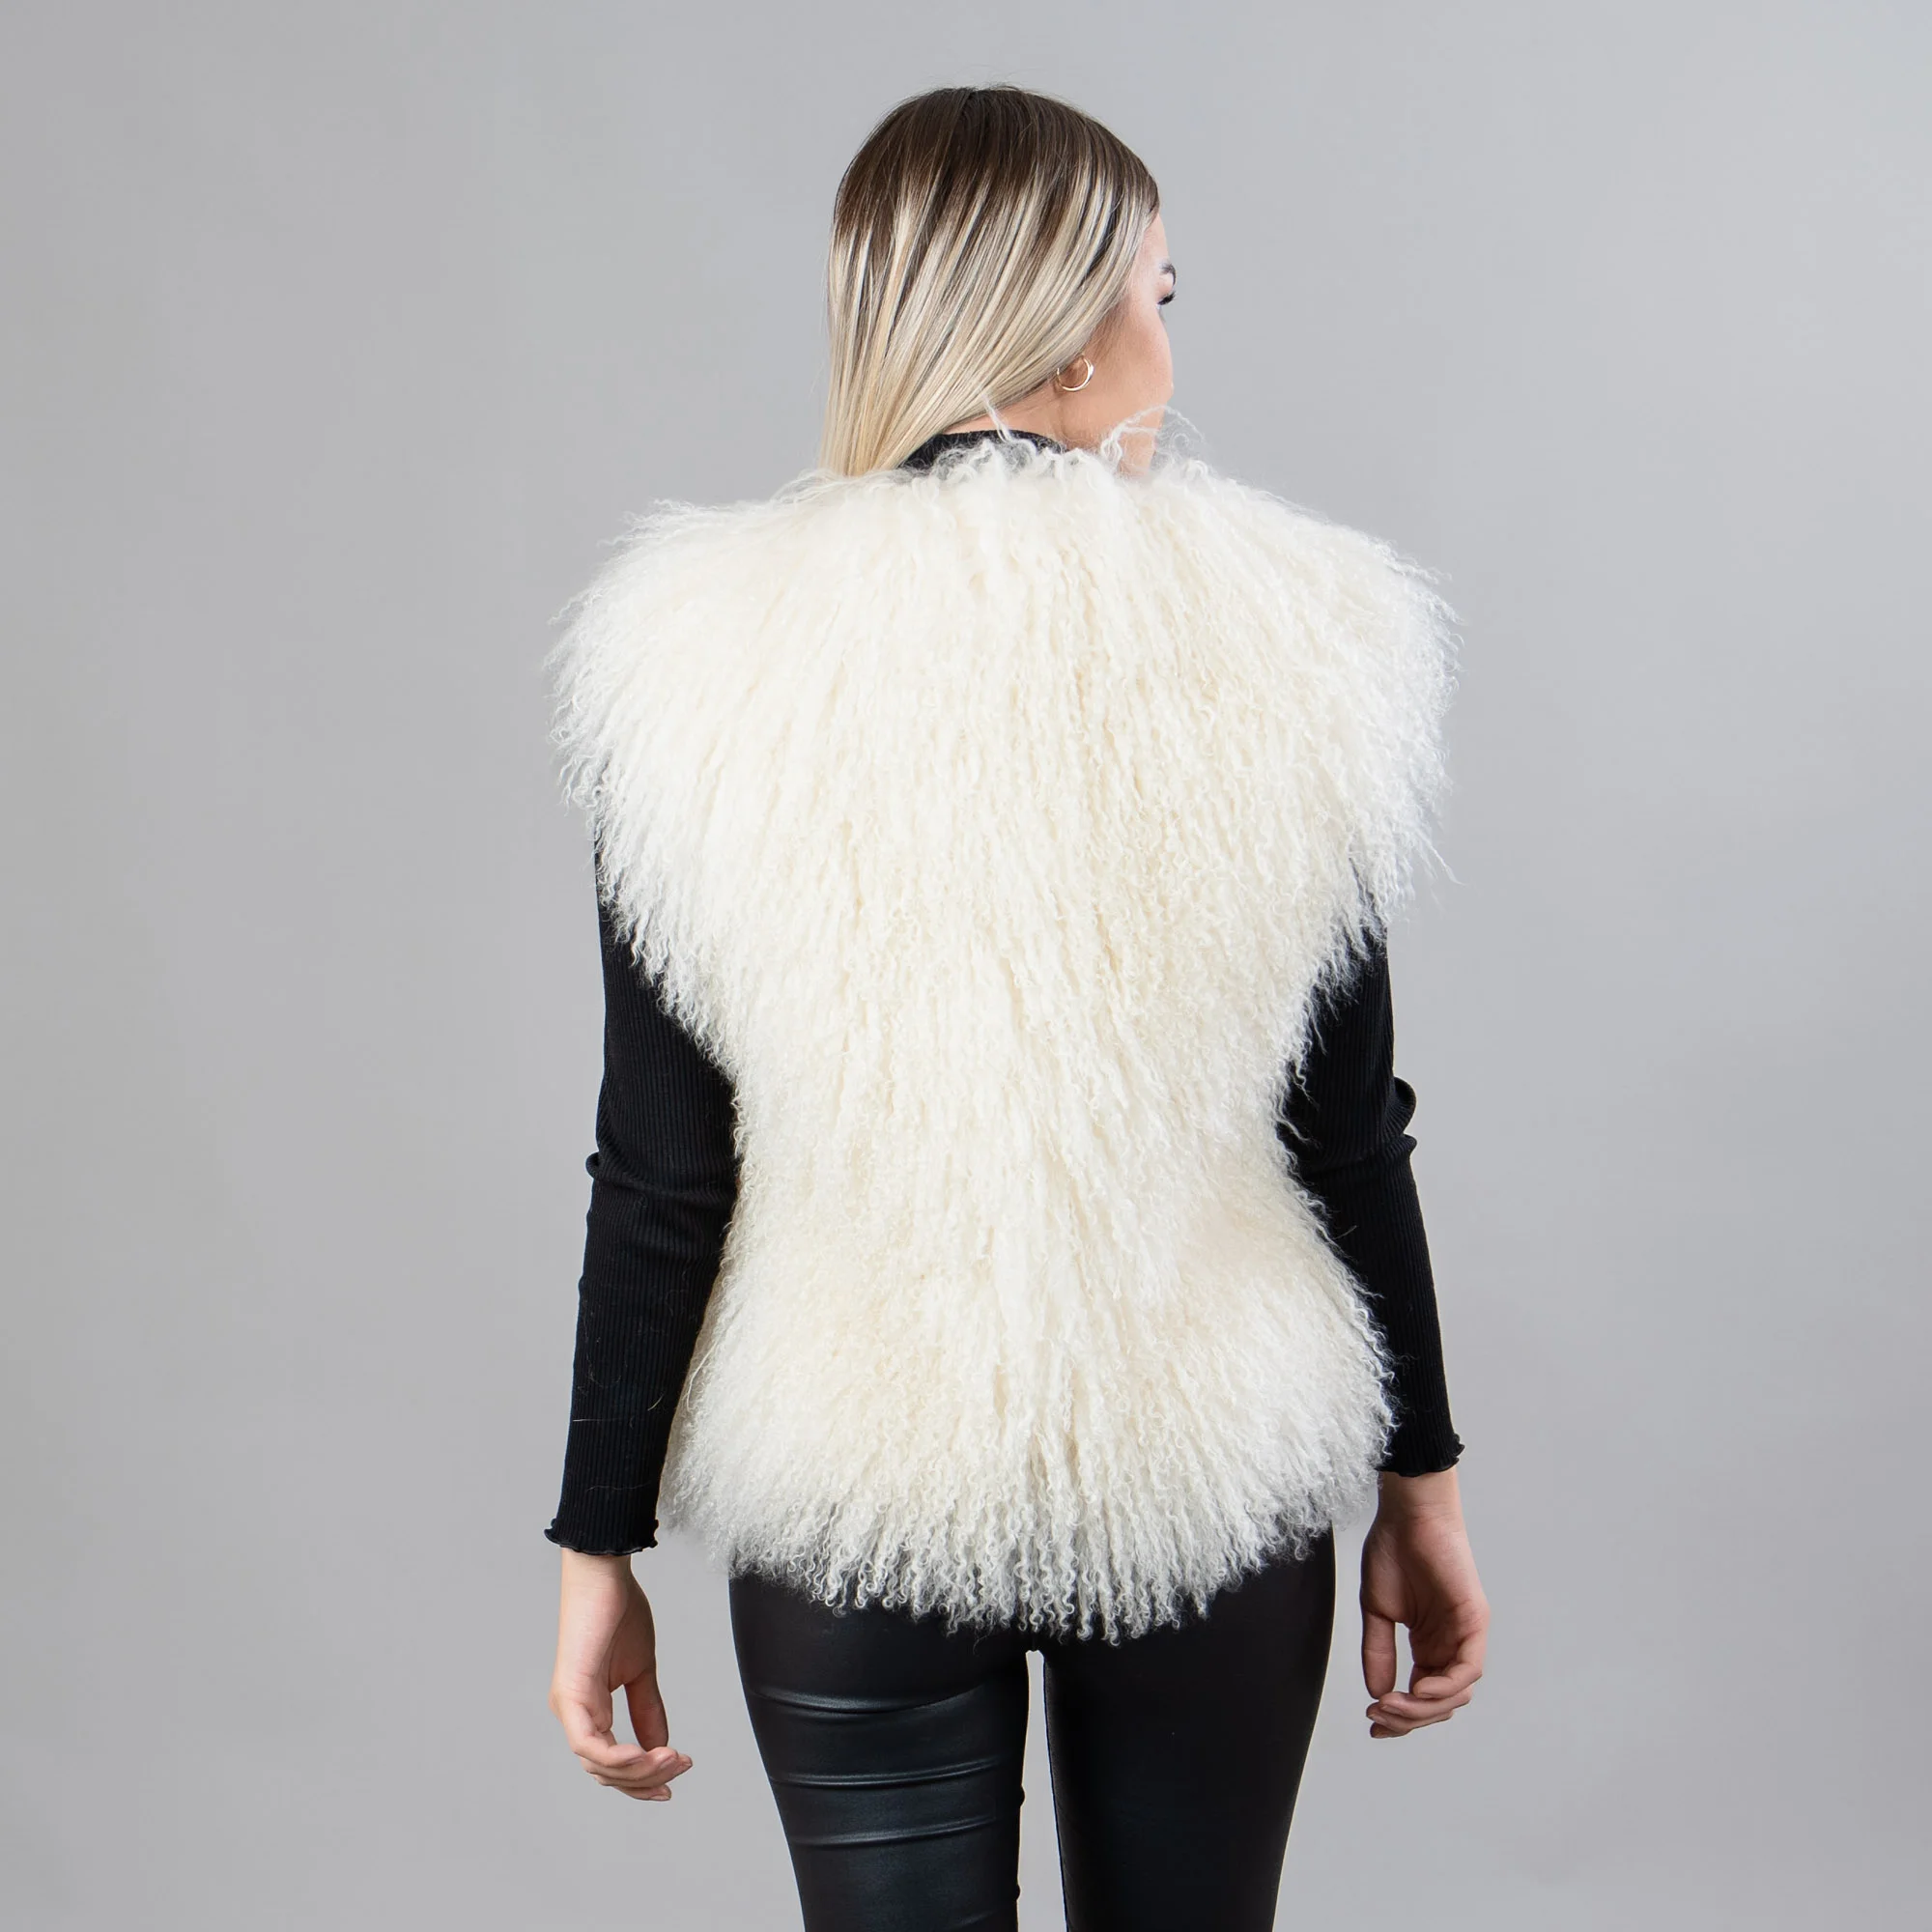 Mongolian sheep fur vest in white color